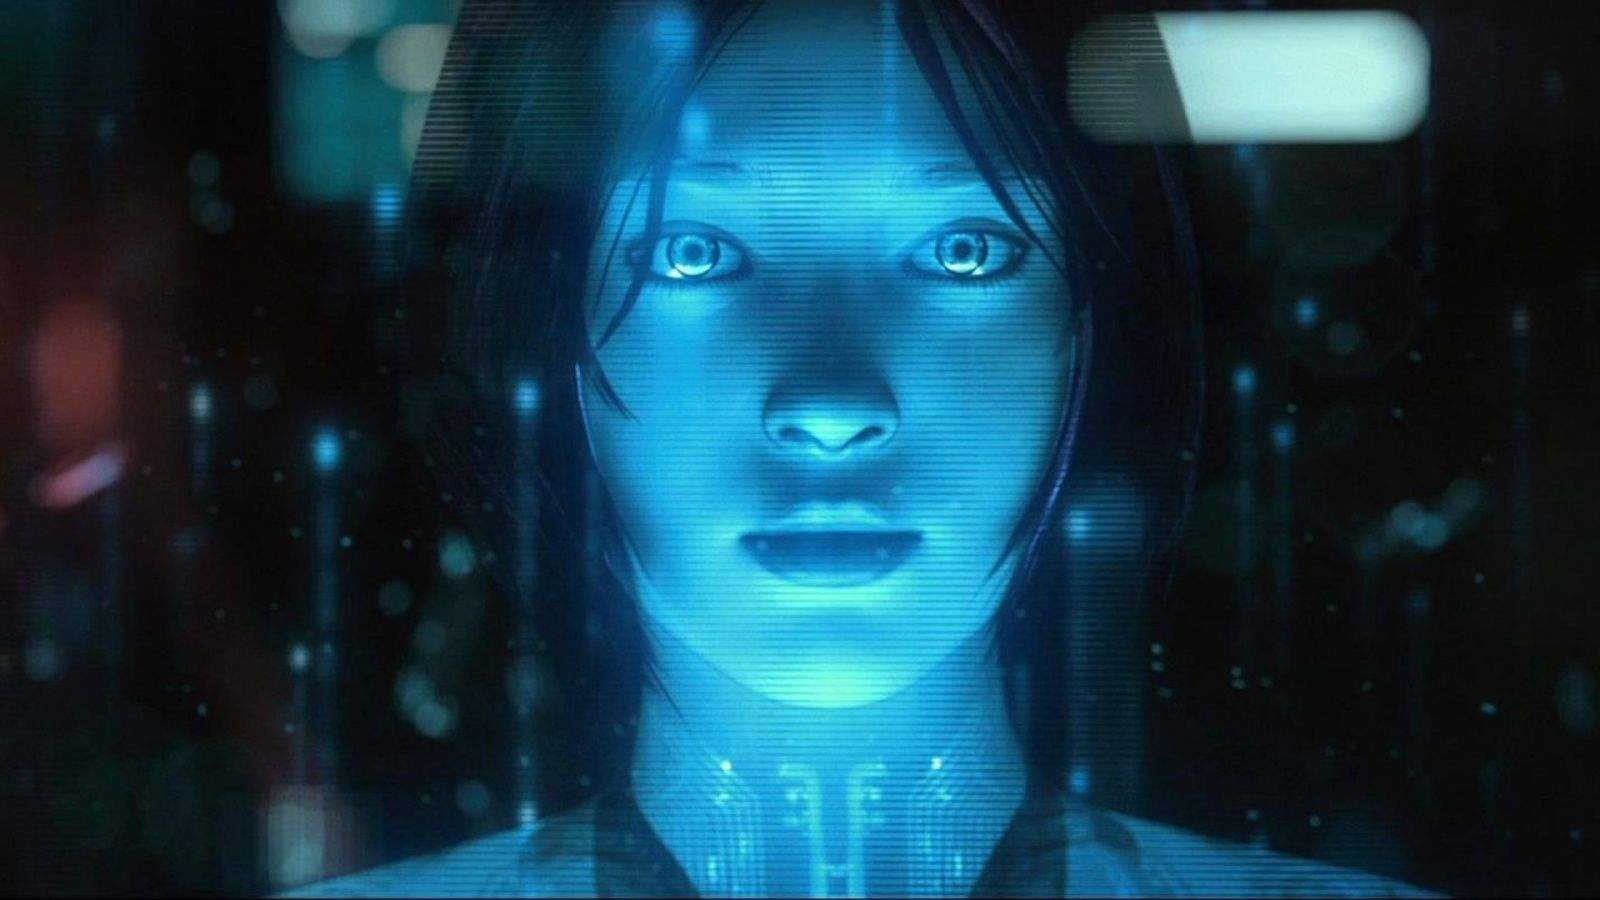 Cortana was named after a character from Halo 4